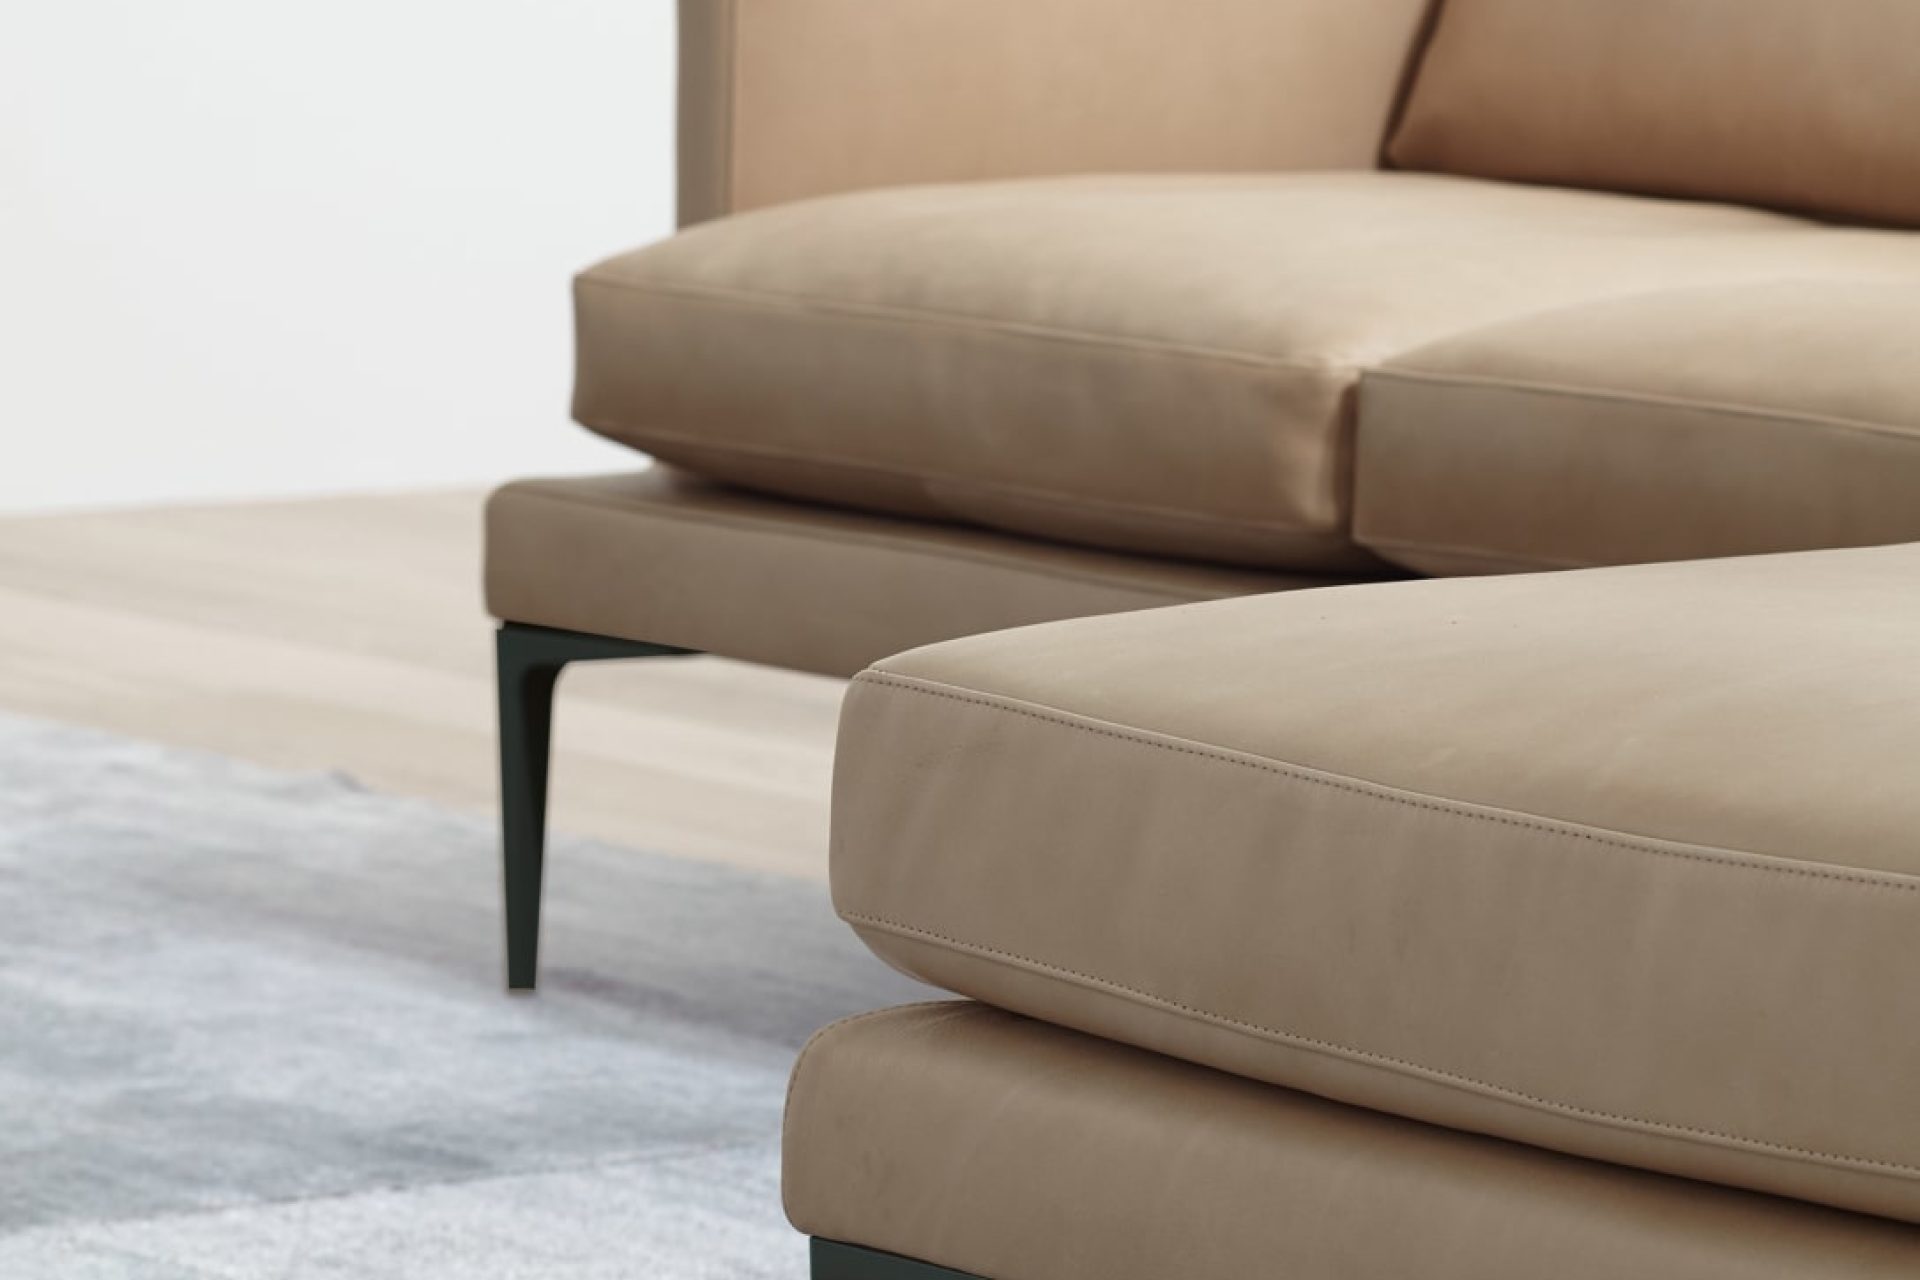 Beige leather designer sofa with steel frame chosen by eba for its interior design projects